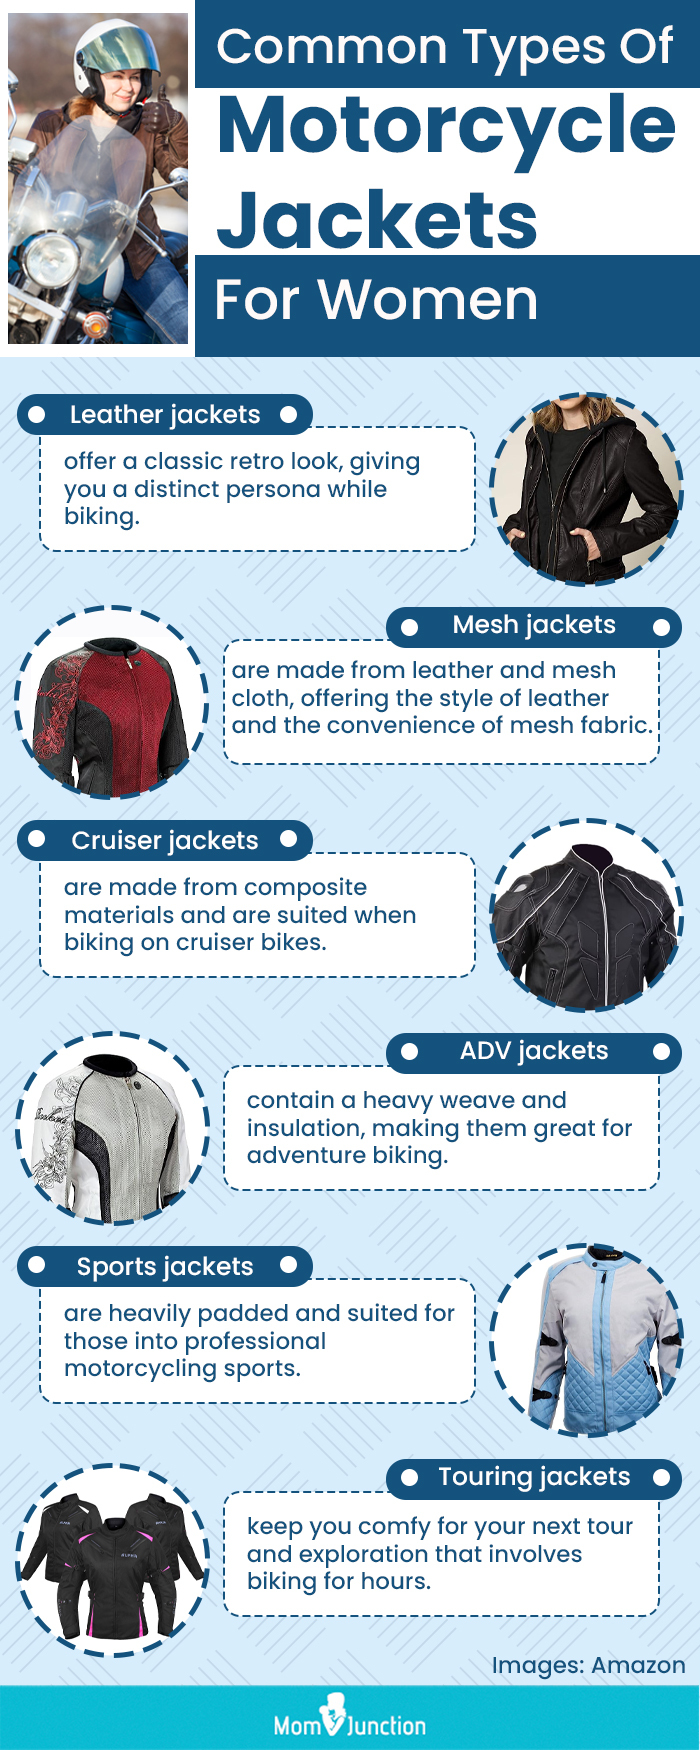 Common Types Of Motorcycle Jackets For Women (infographic)